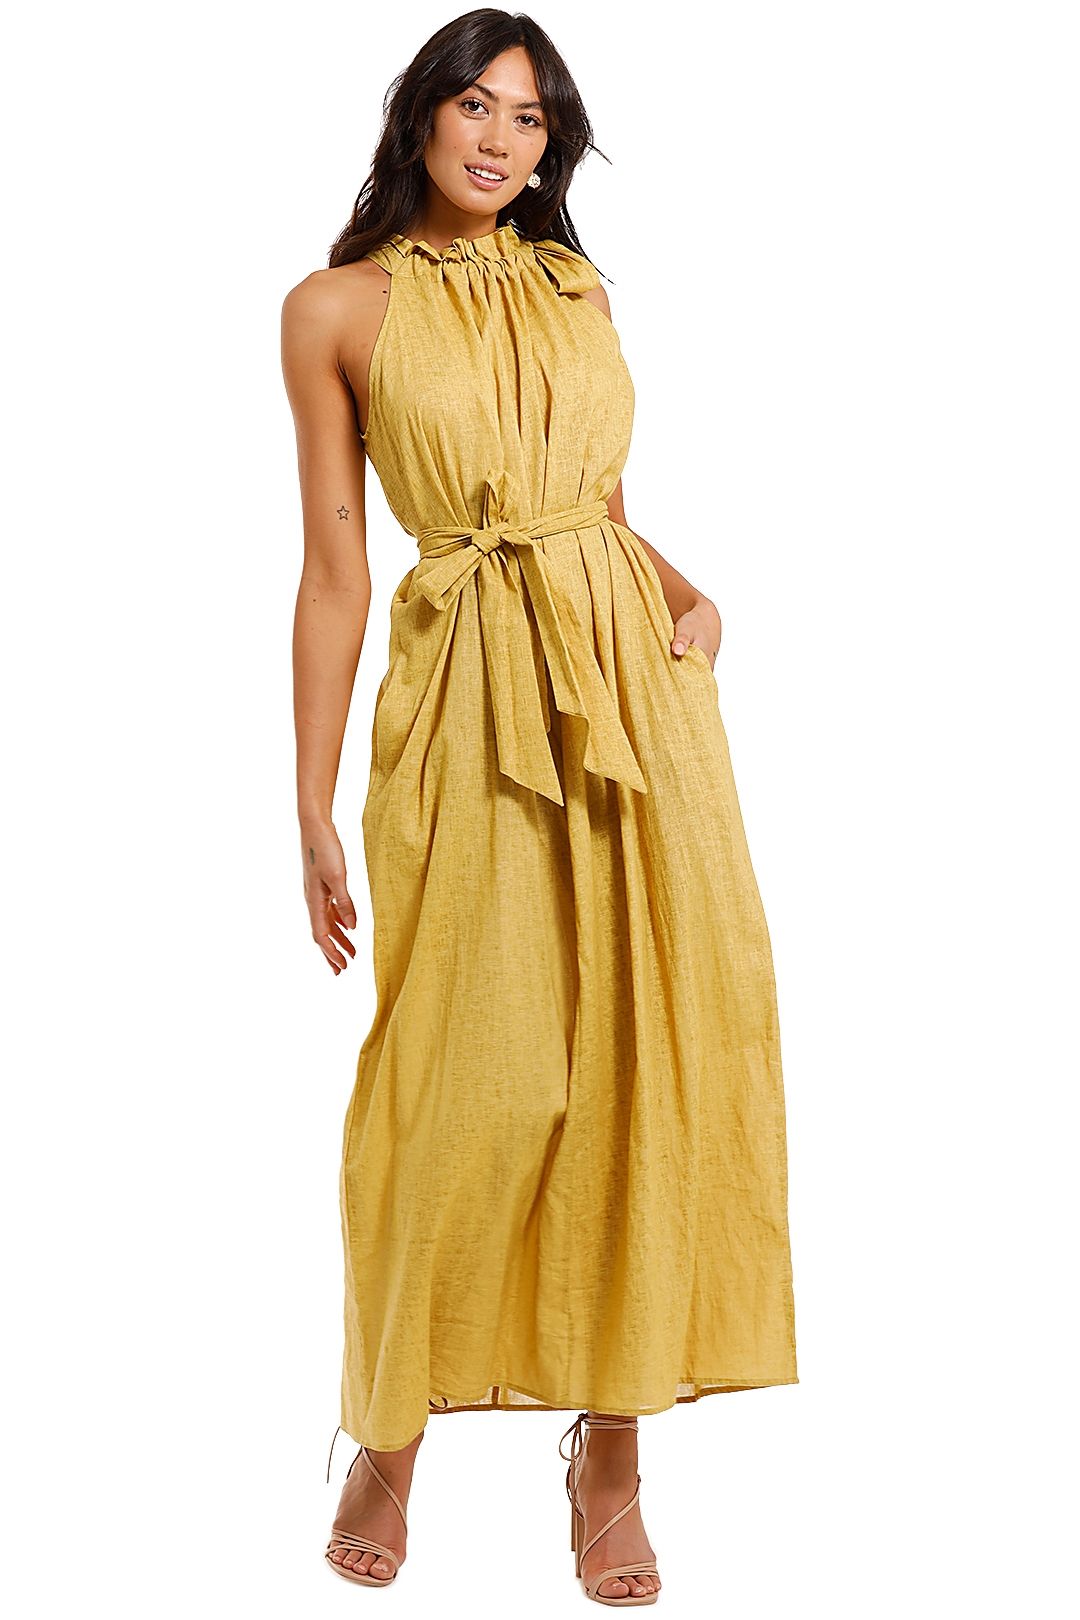 Morrison Neve Yellow Maxi Dress belted